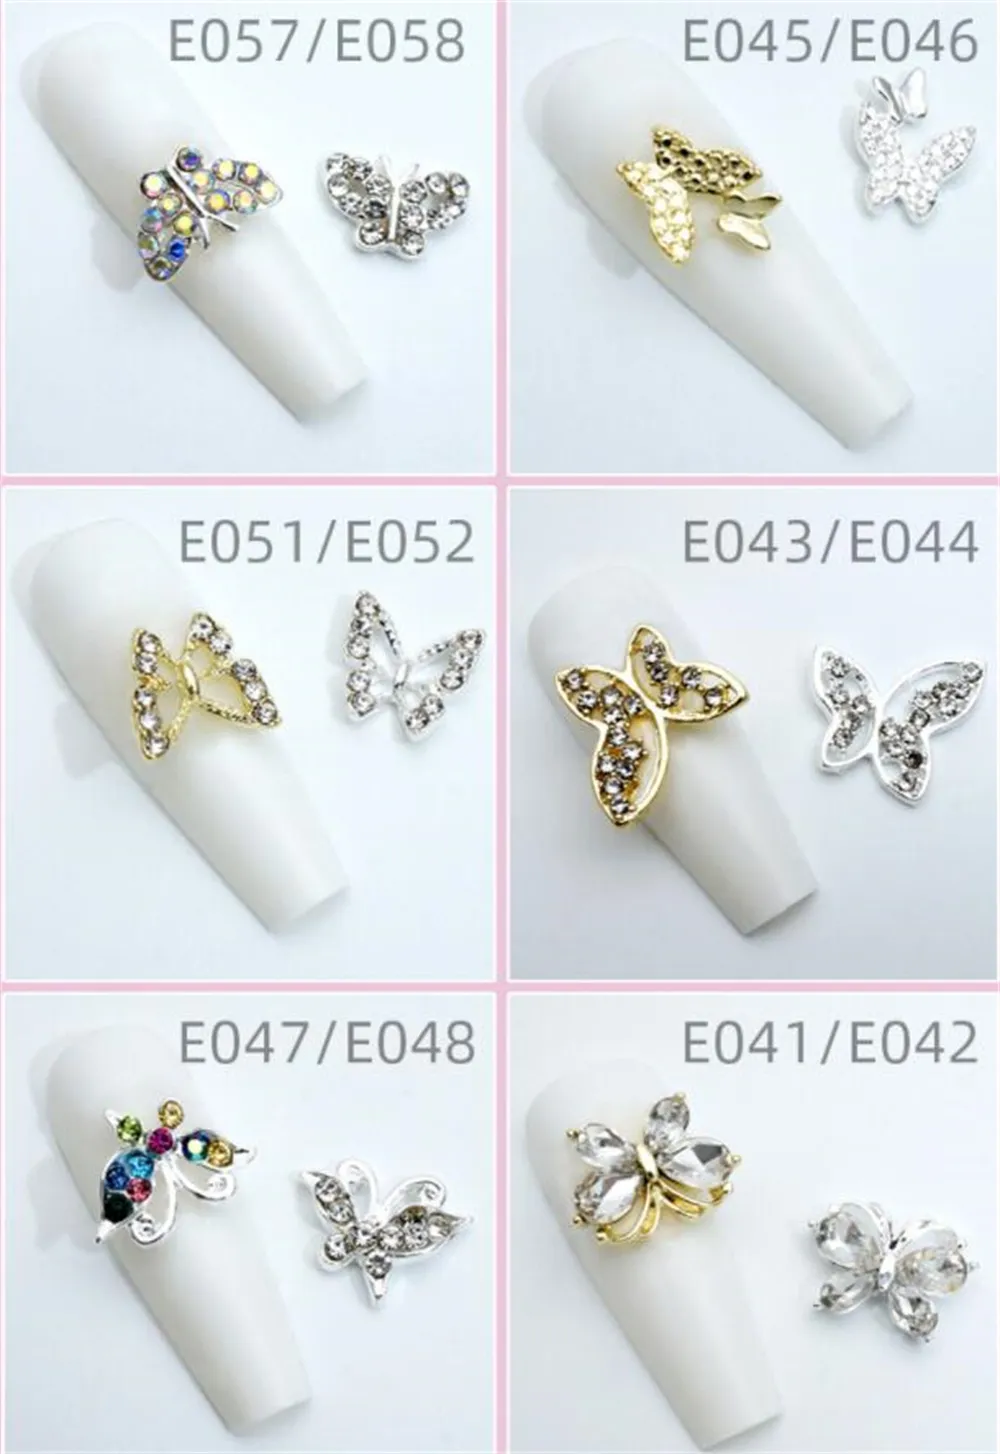 Handmade Multicolor Butterfly Dangle Nail Charms For DIY Conch